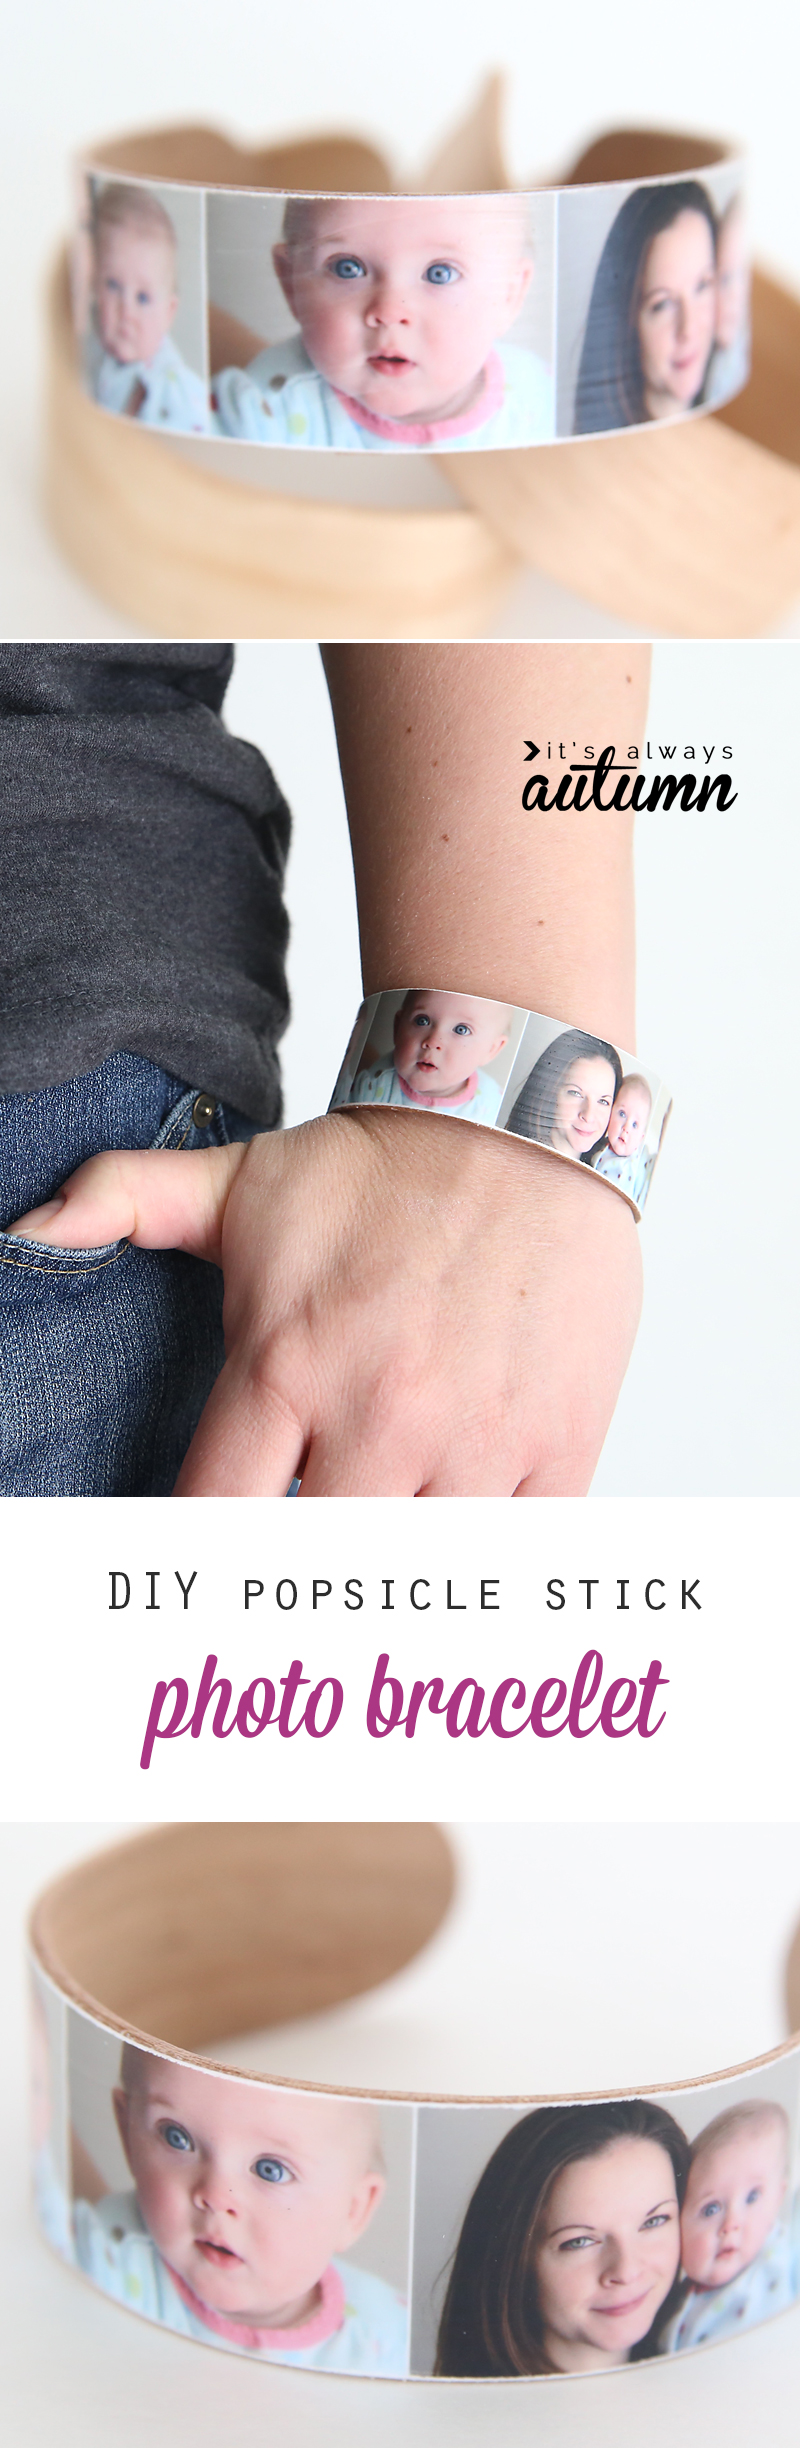 Person wearing a DIY popsicle stick bracelet with photos on it